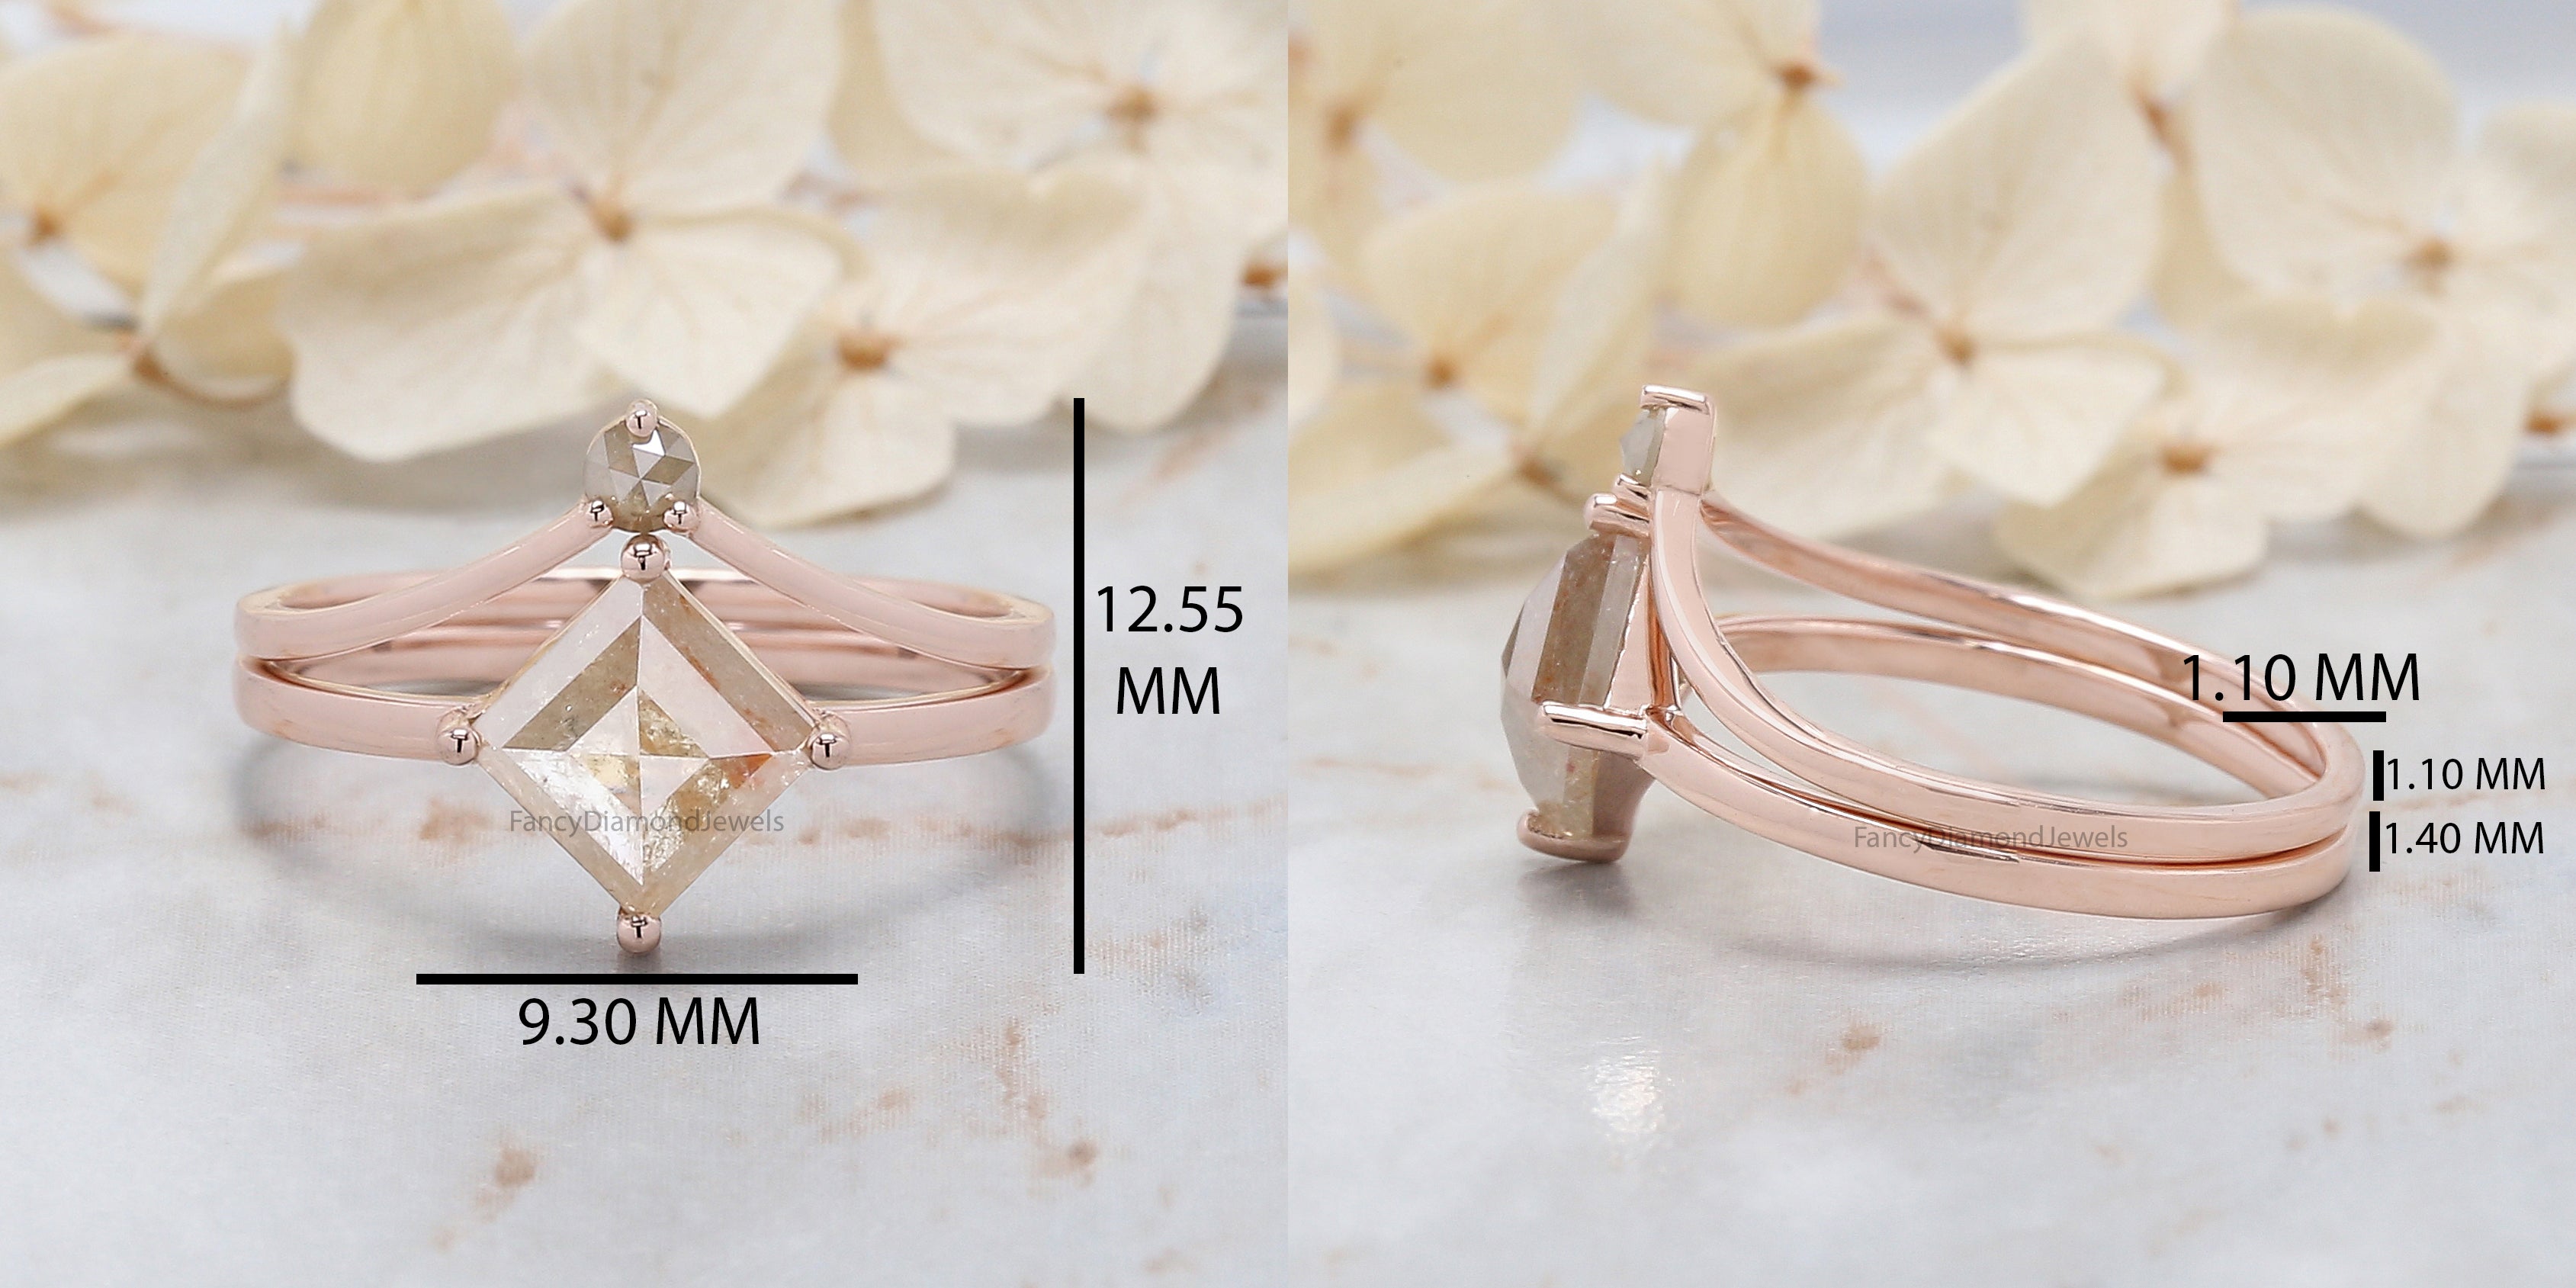 Kite Cut Grey Color Diamond Ring 1.51 Ct 8.55 MM Kite Shape Diamond Ring 14K Solid Rose Gold Silver Kite Engagement Ring Gift For Her QL9612